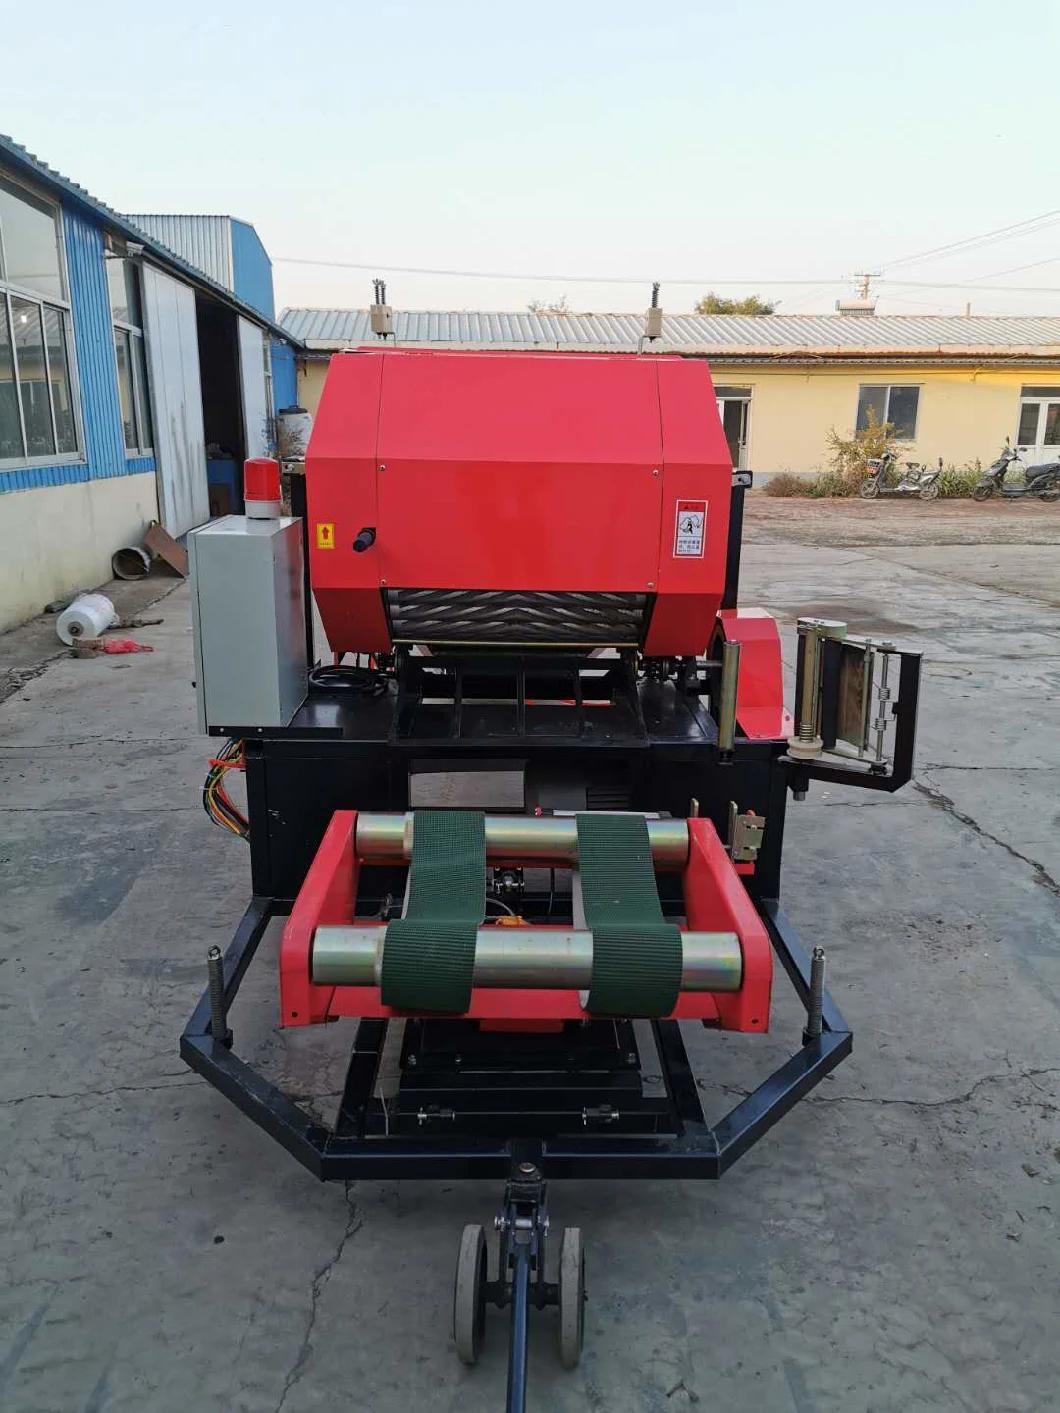 Hot Sale of Stationary Type Corn, Maize, Rice, Wheat, Sweet Sorghum Chopped Straws Round Baler and Wrapper, Farm Machine